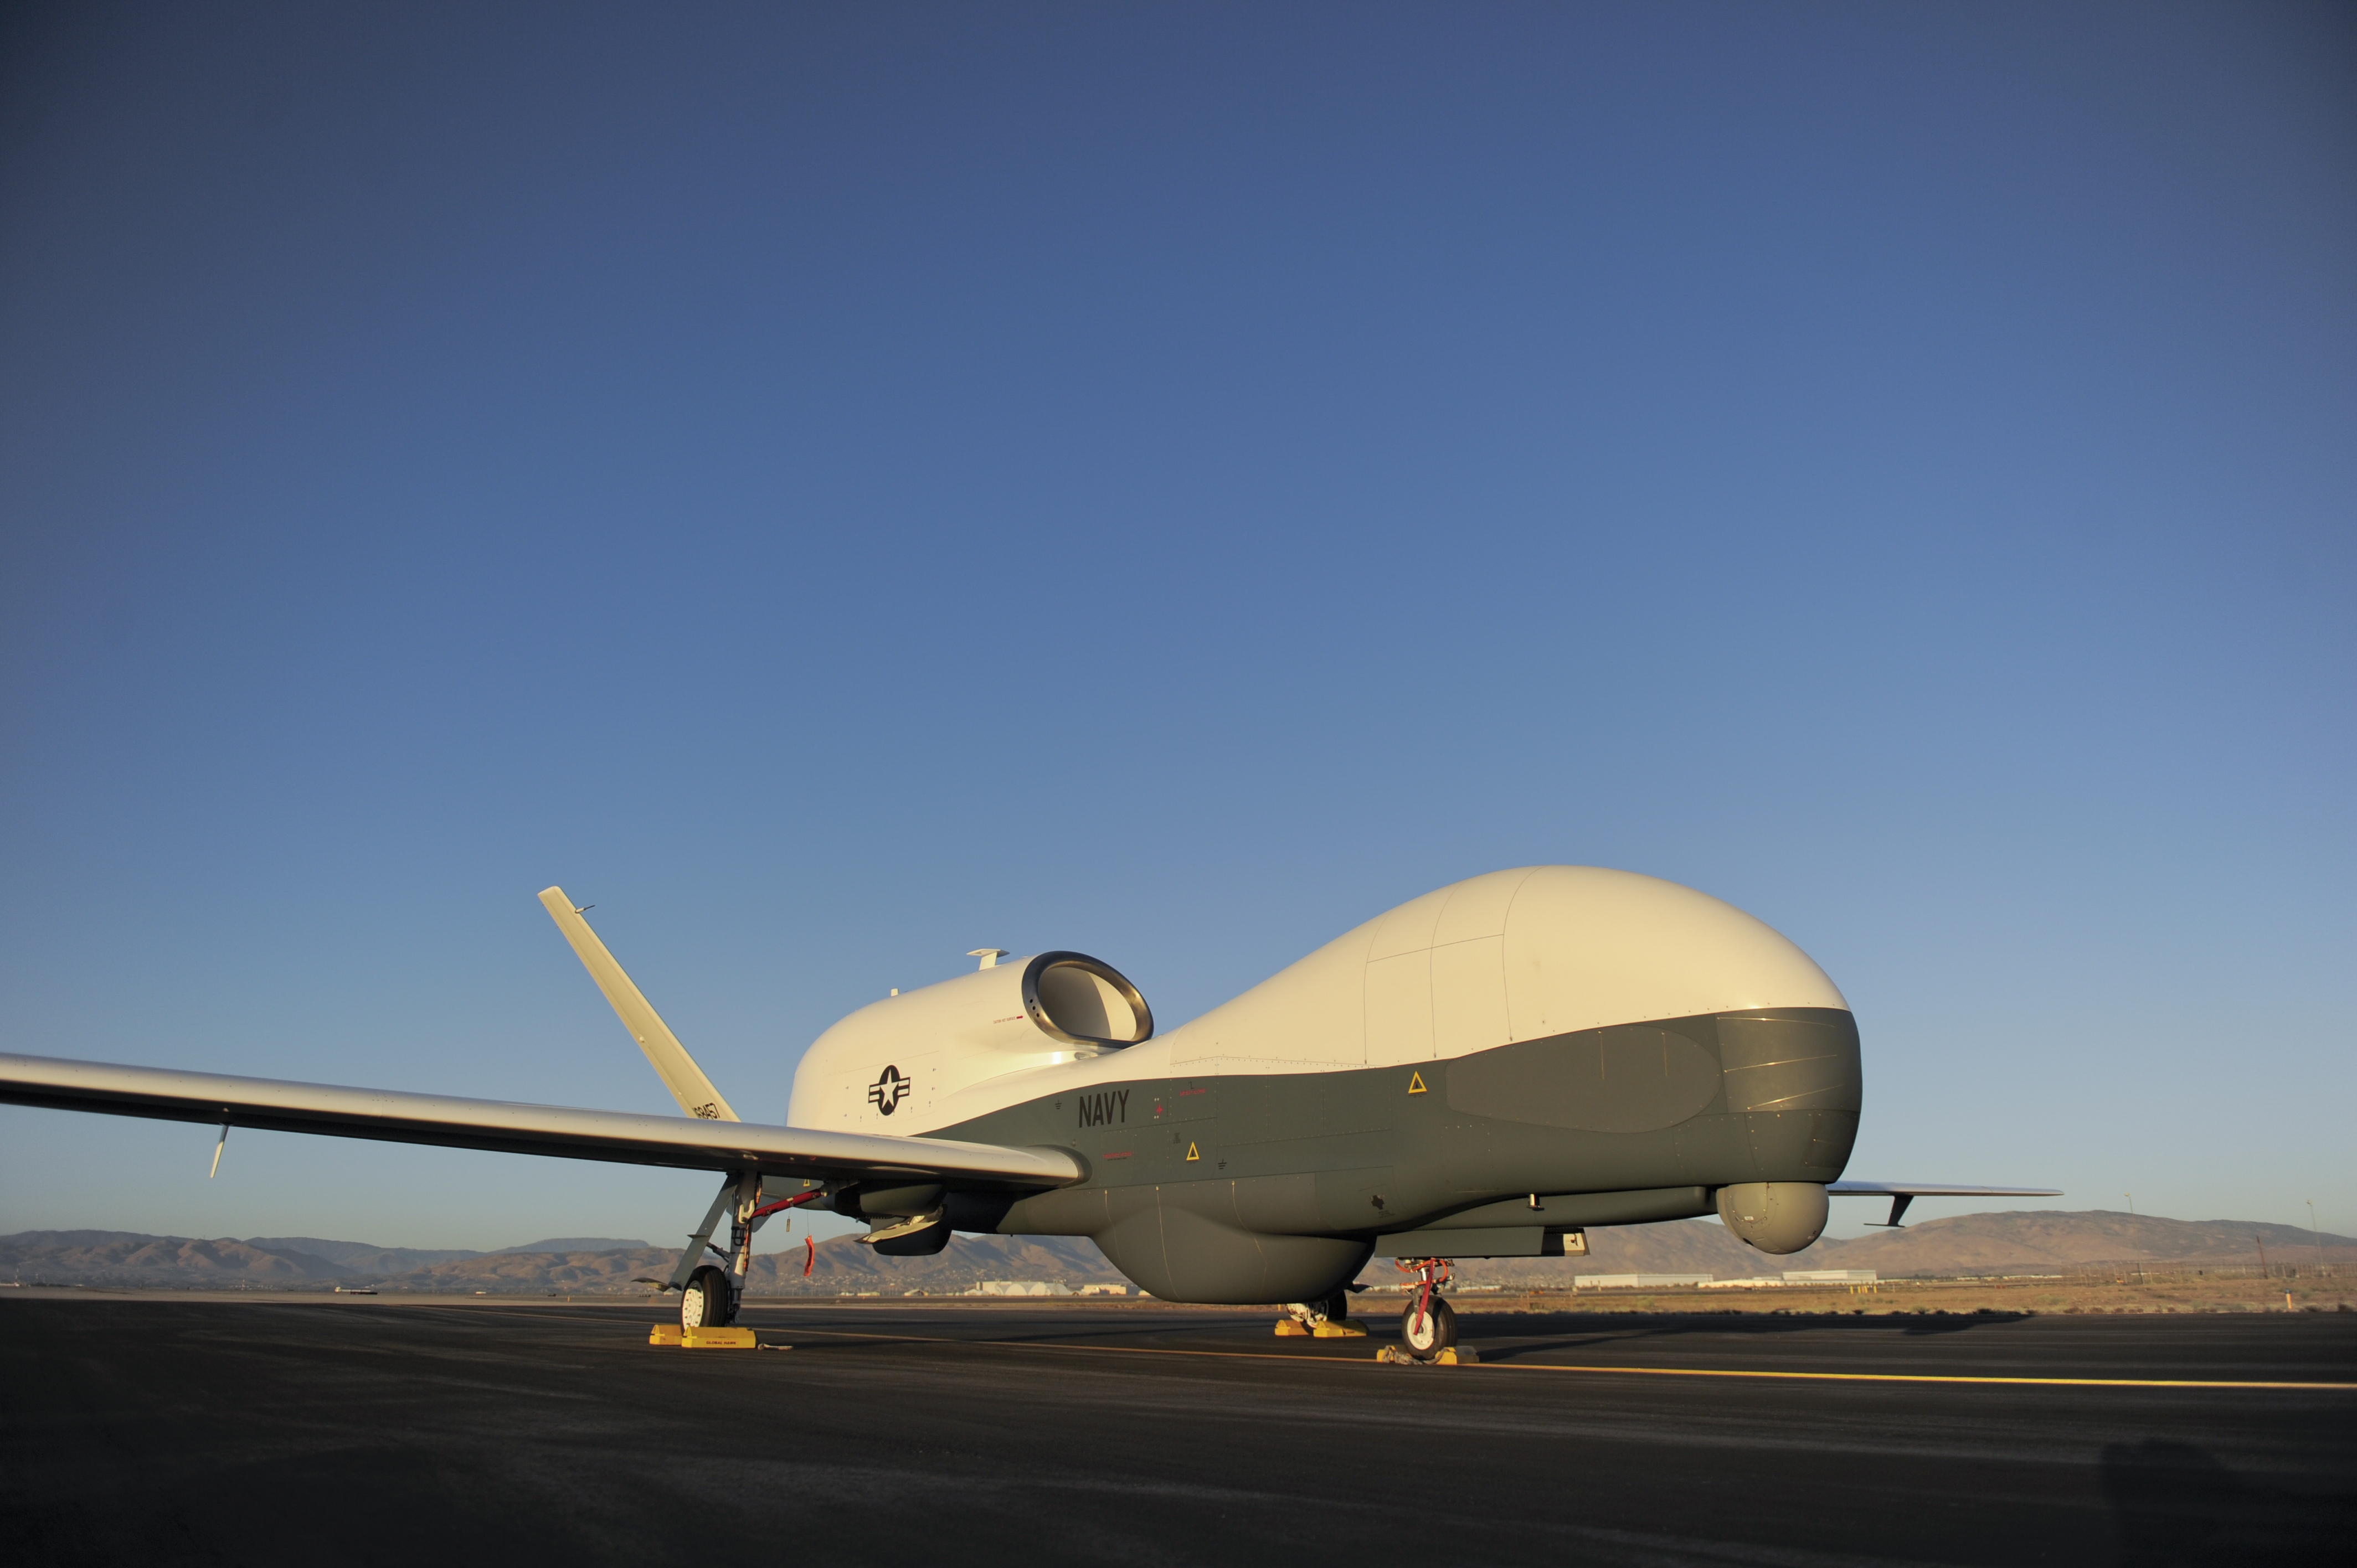 Flickr - Official U.S. Navy Imagery - In this undated file photo, an RQ-4 Global Hawk unmanned aerial vehicle sits on a flight line.